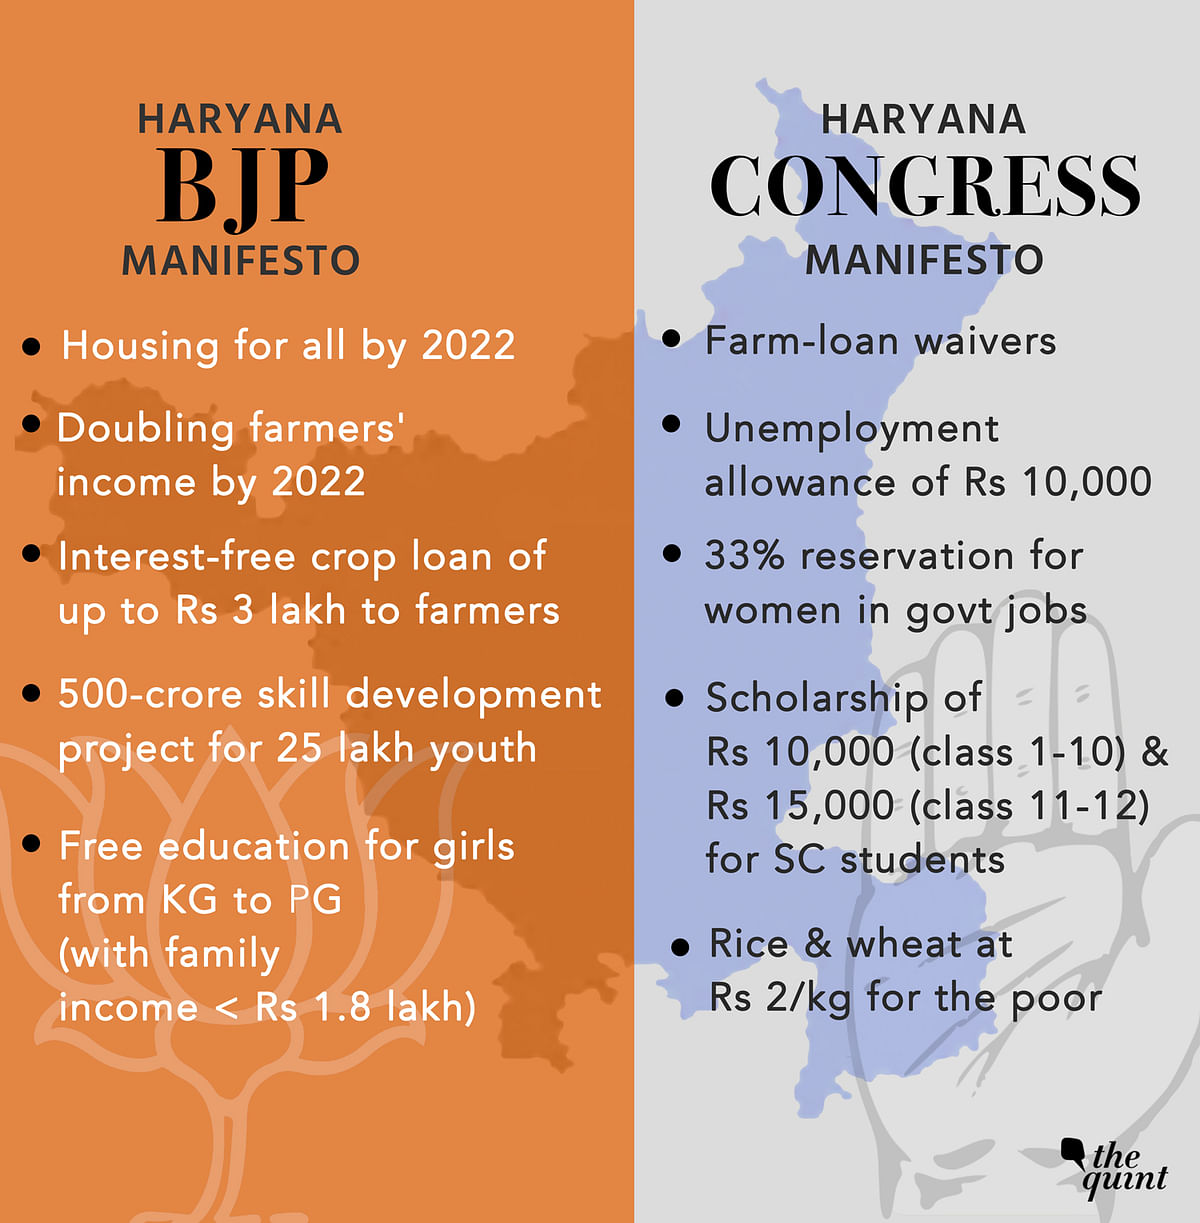 Here’s why party manifestos are slowly and steadily gaining ground, both for the voters and the parties.